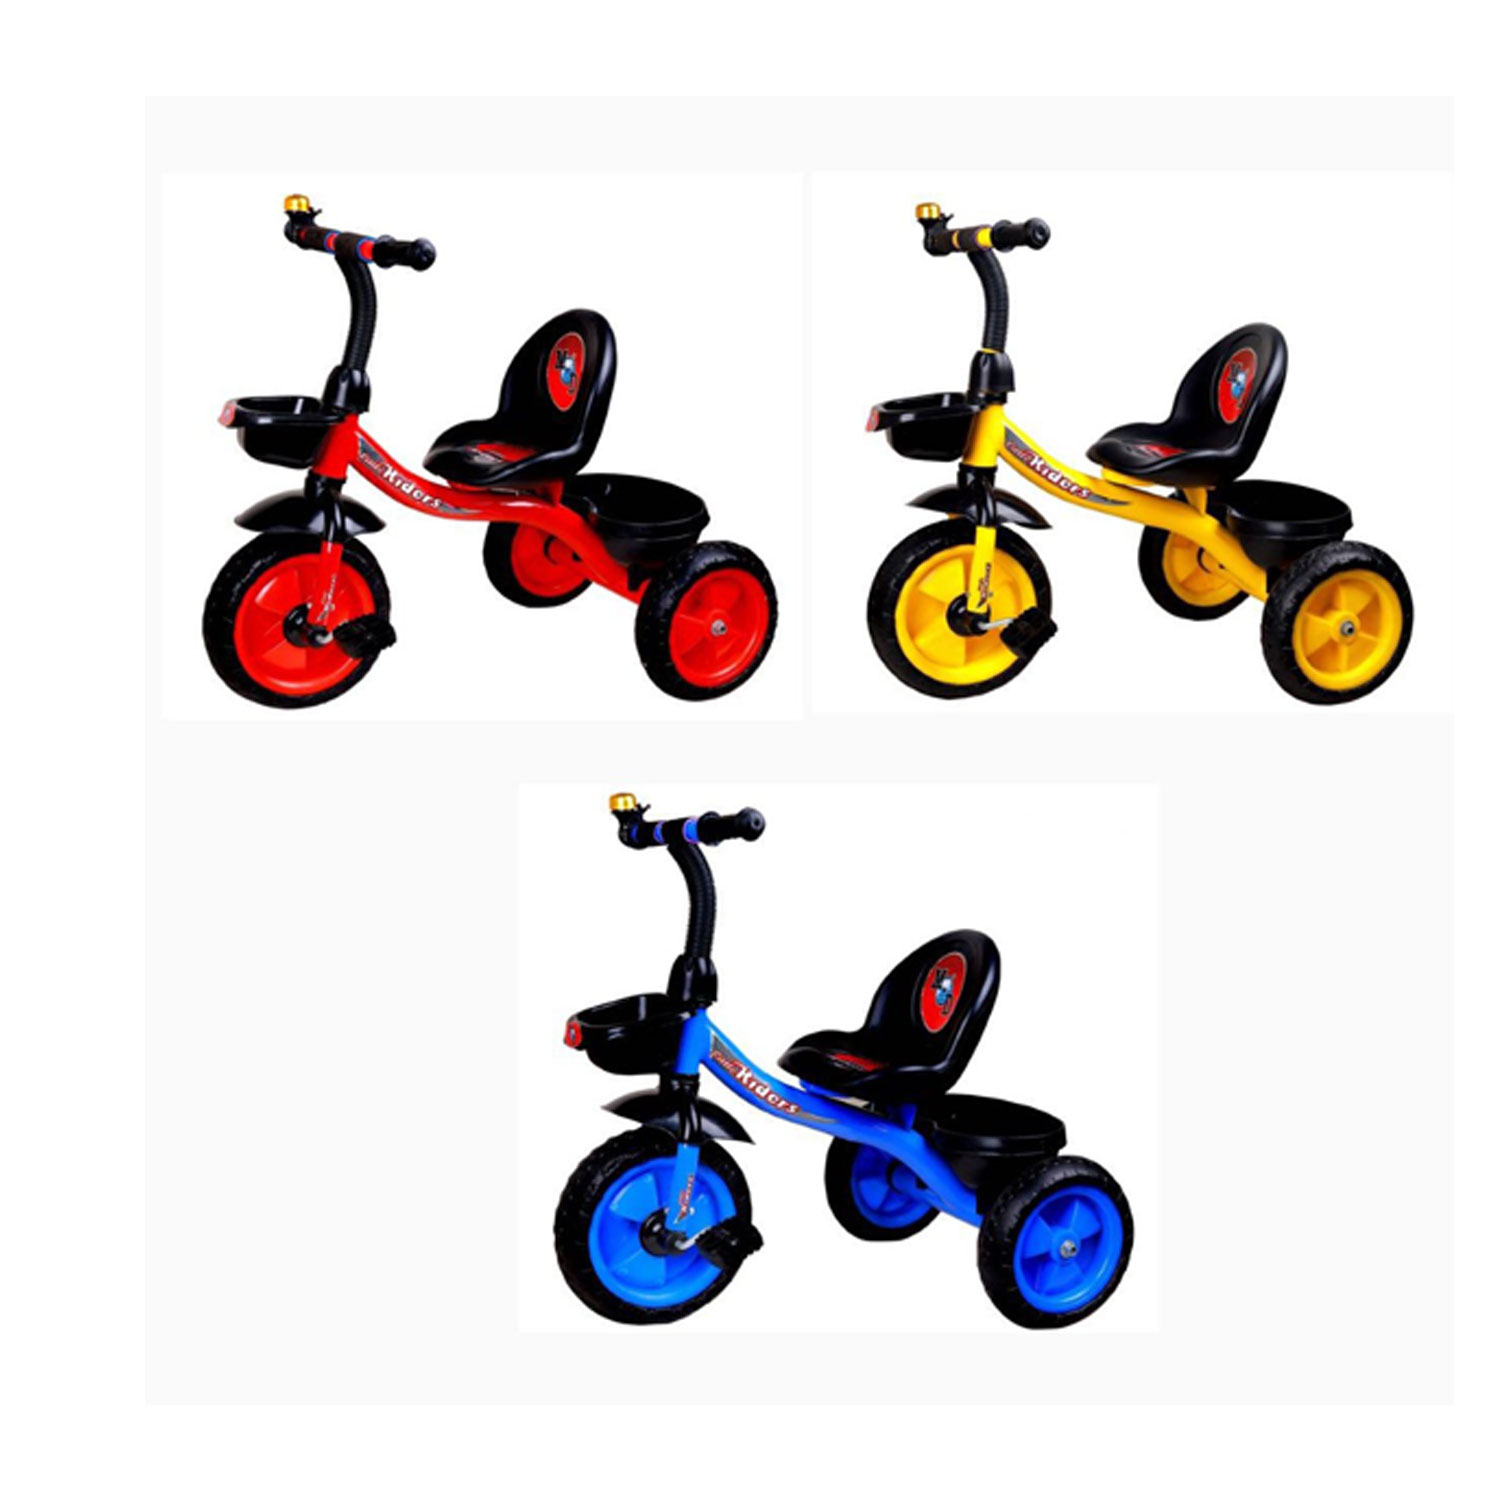 NAVRANGI BABY TRICYCLE FOR KIDS WITH FRONT OR BACK BASKET. TRICYCLE FOR KIDS  MD-115 